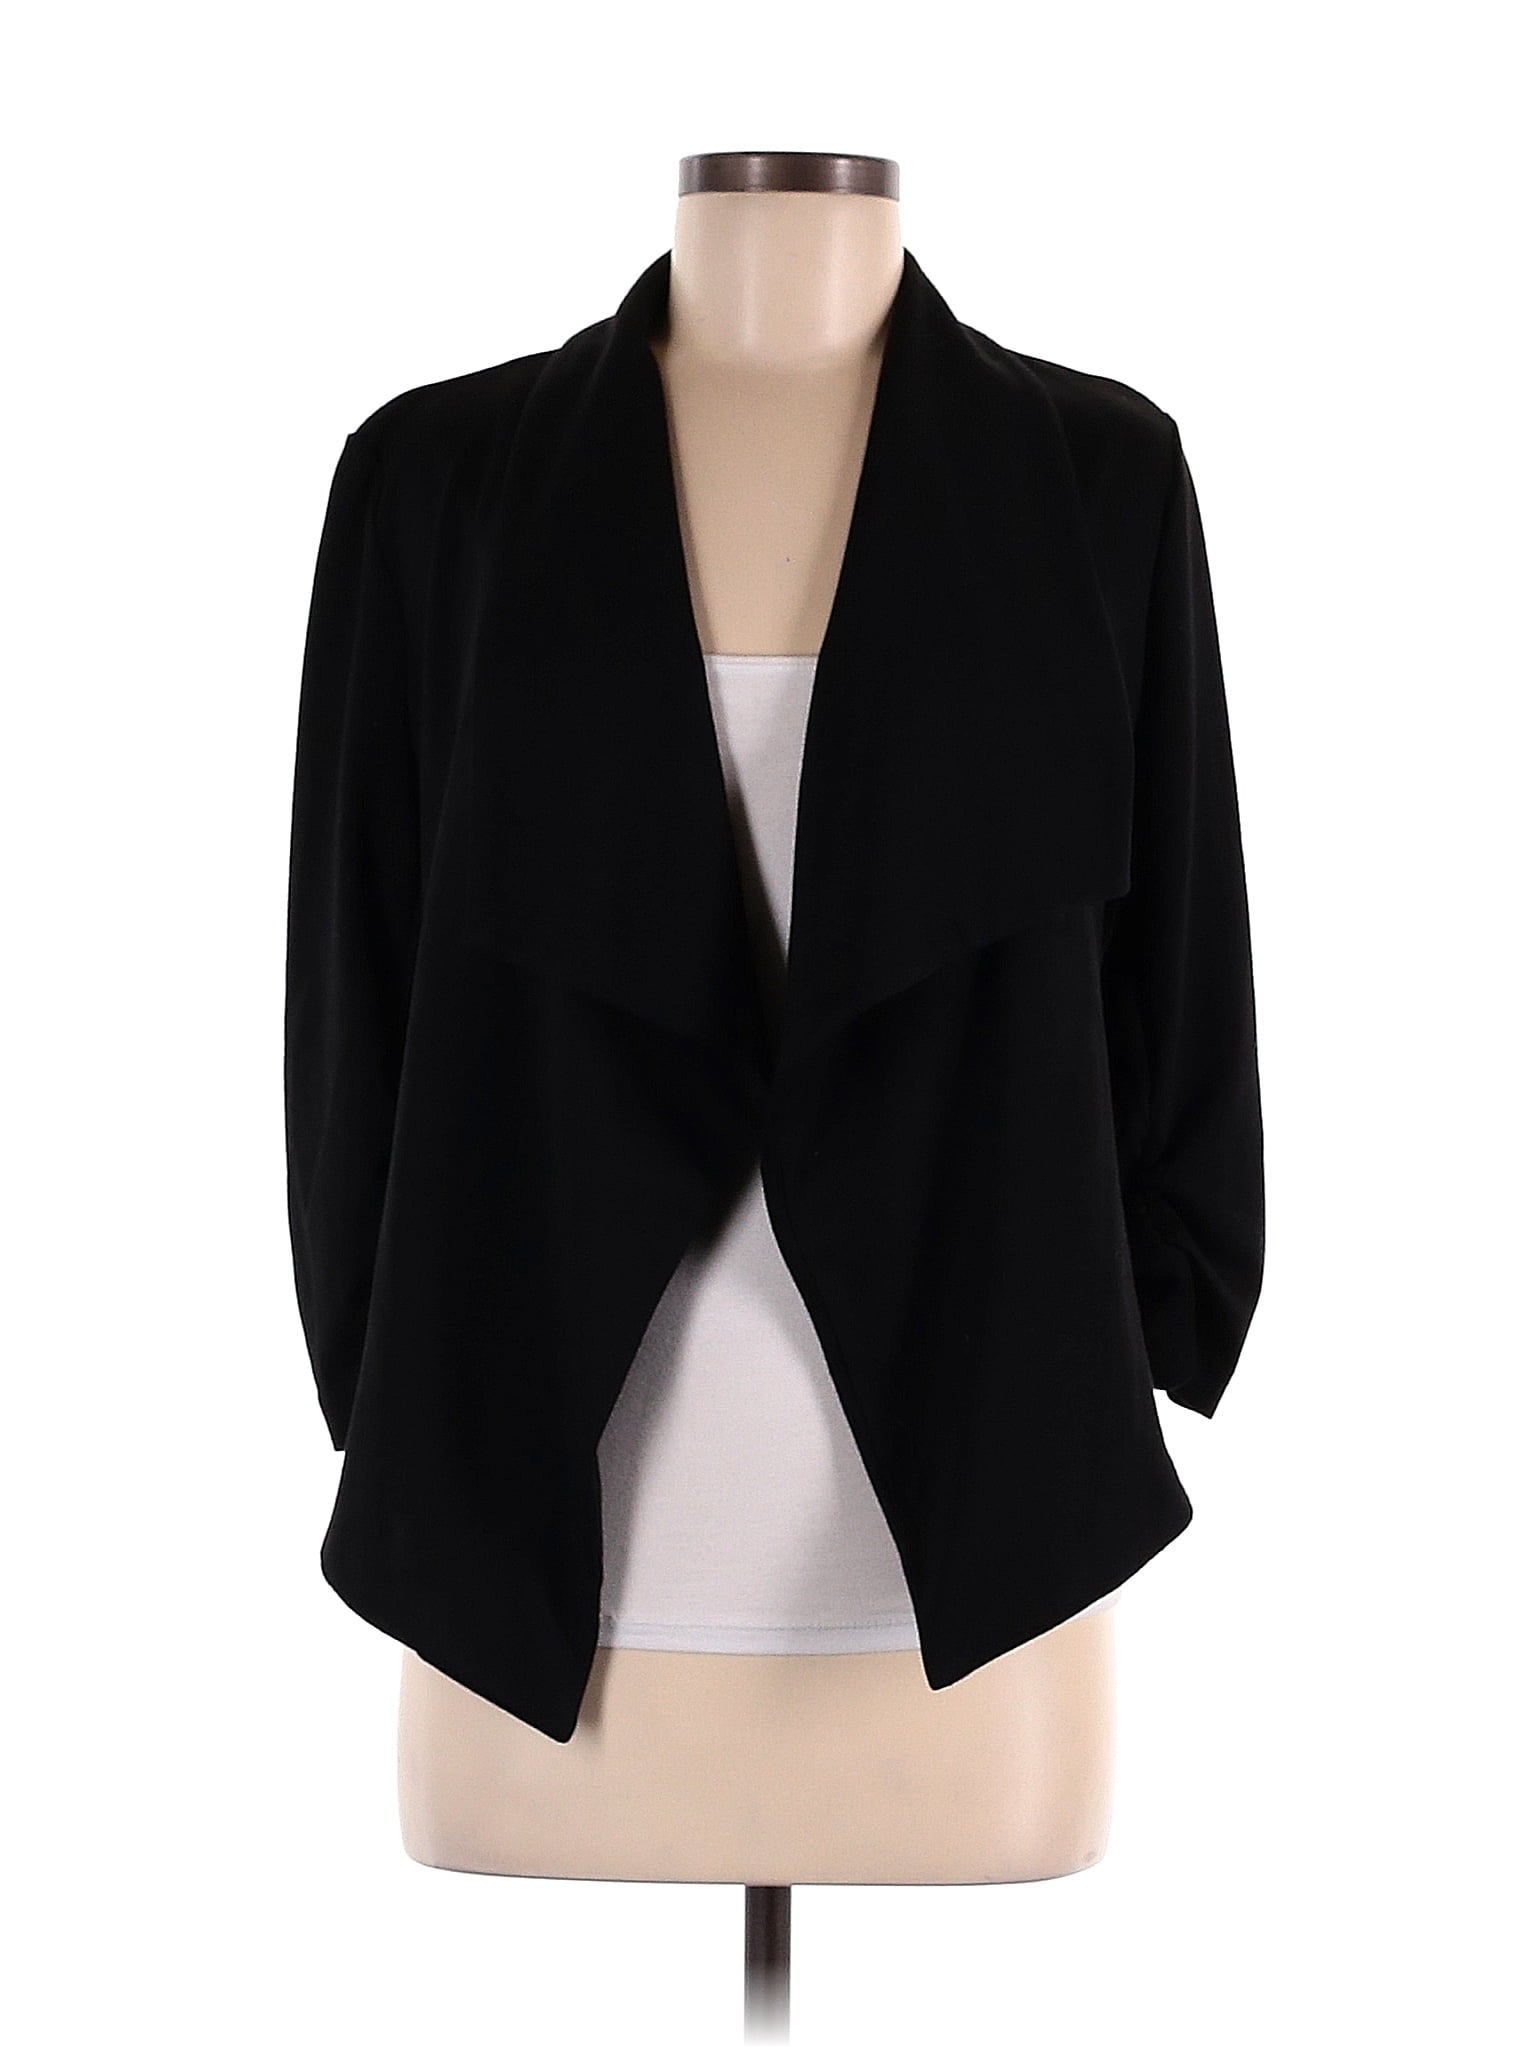 Candie's Color Block Solid Black Cardigan Size M - 62% off